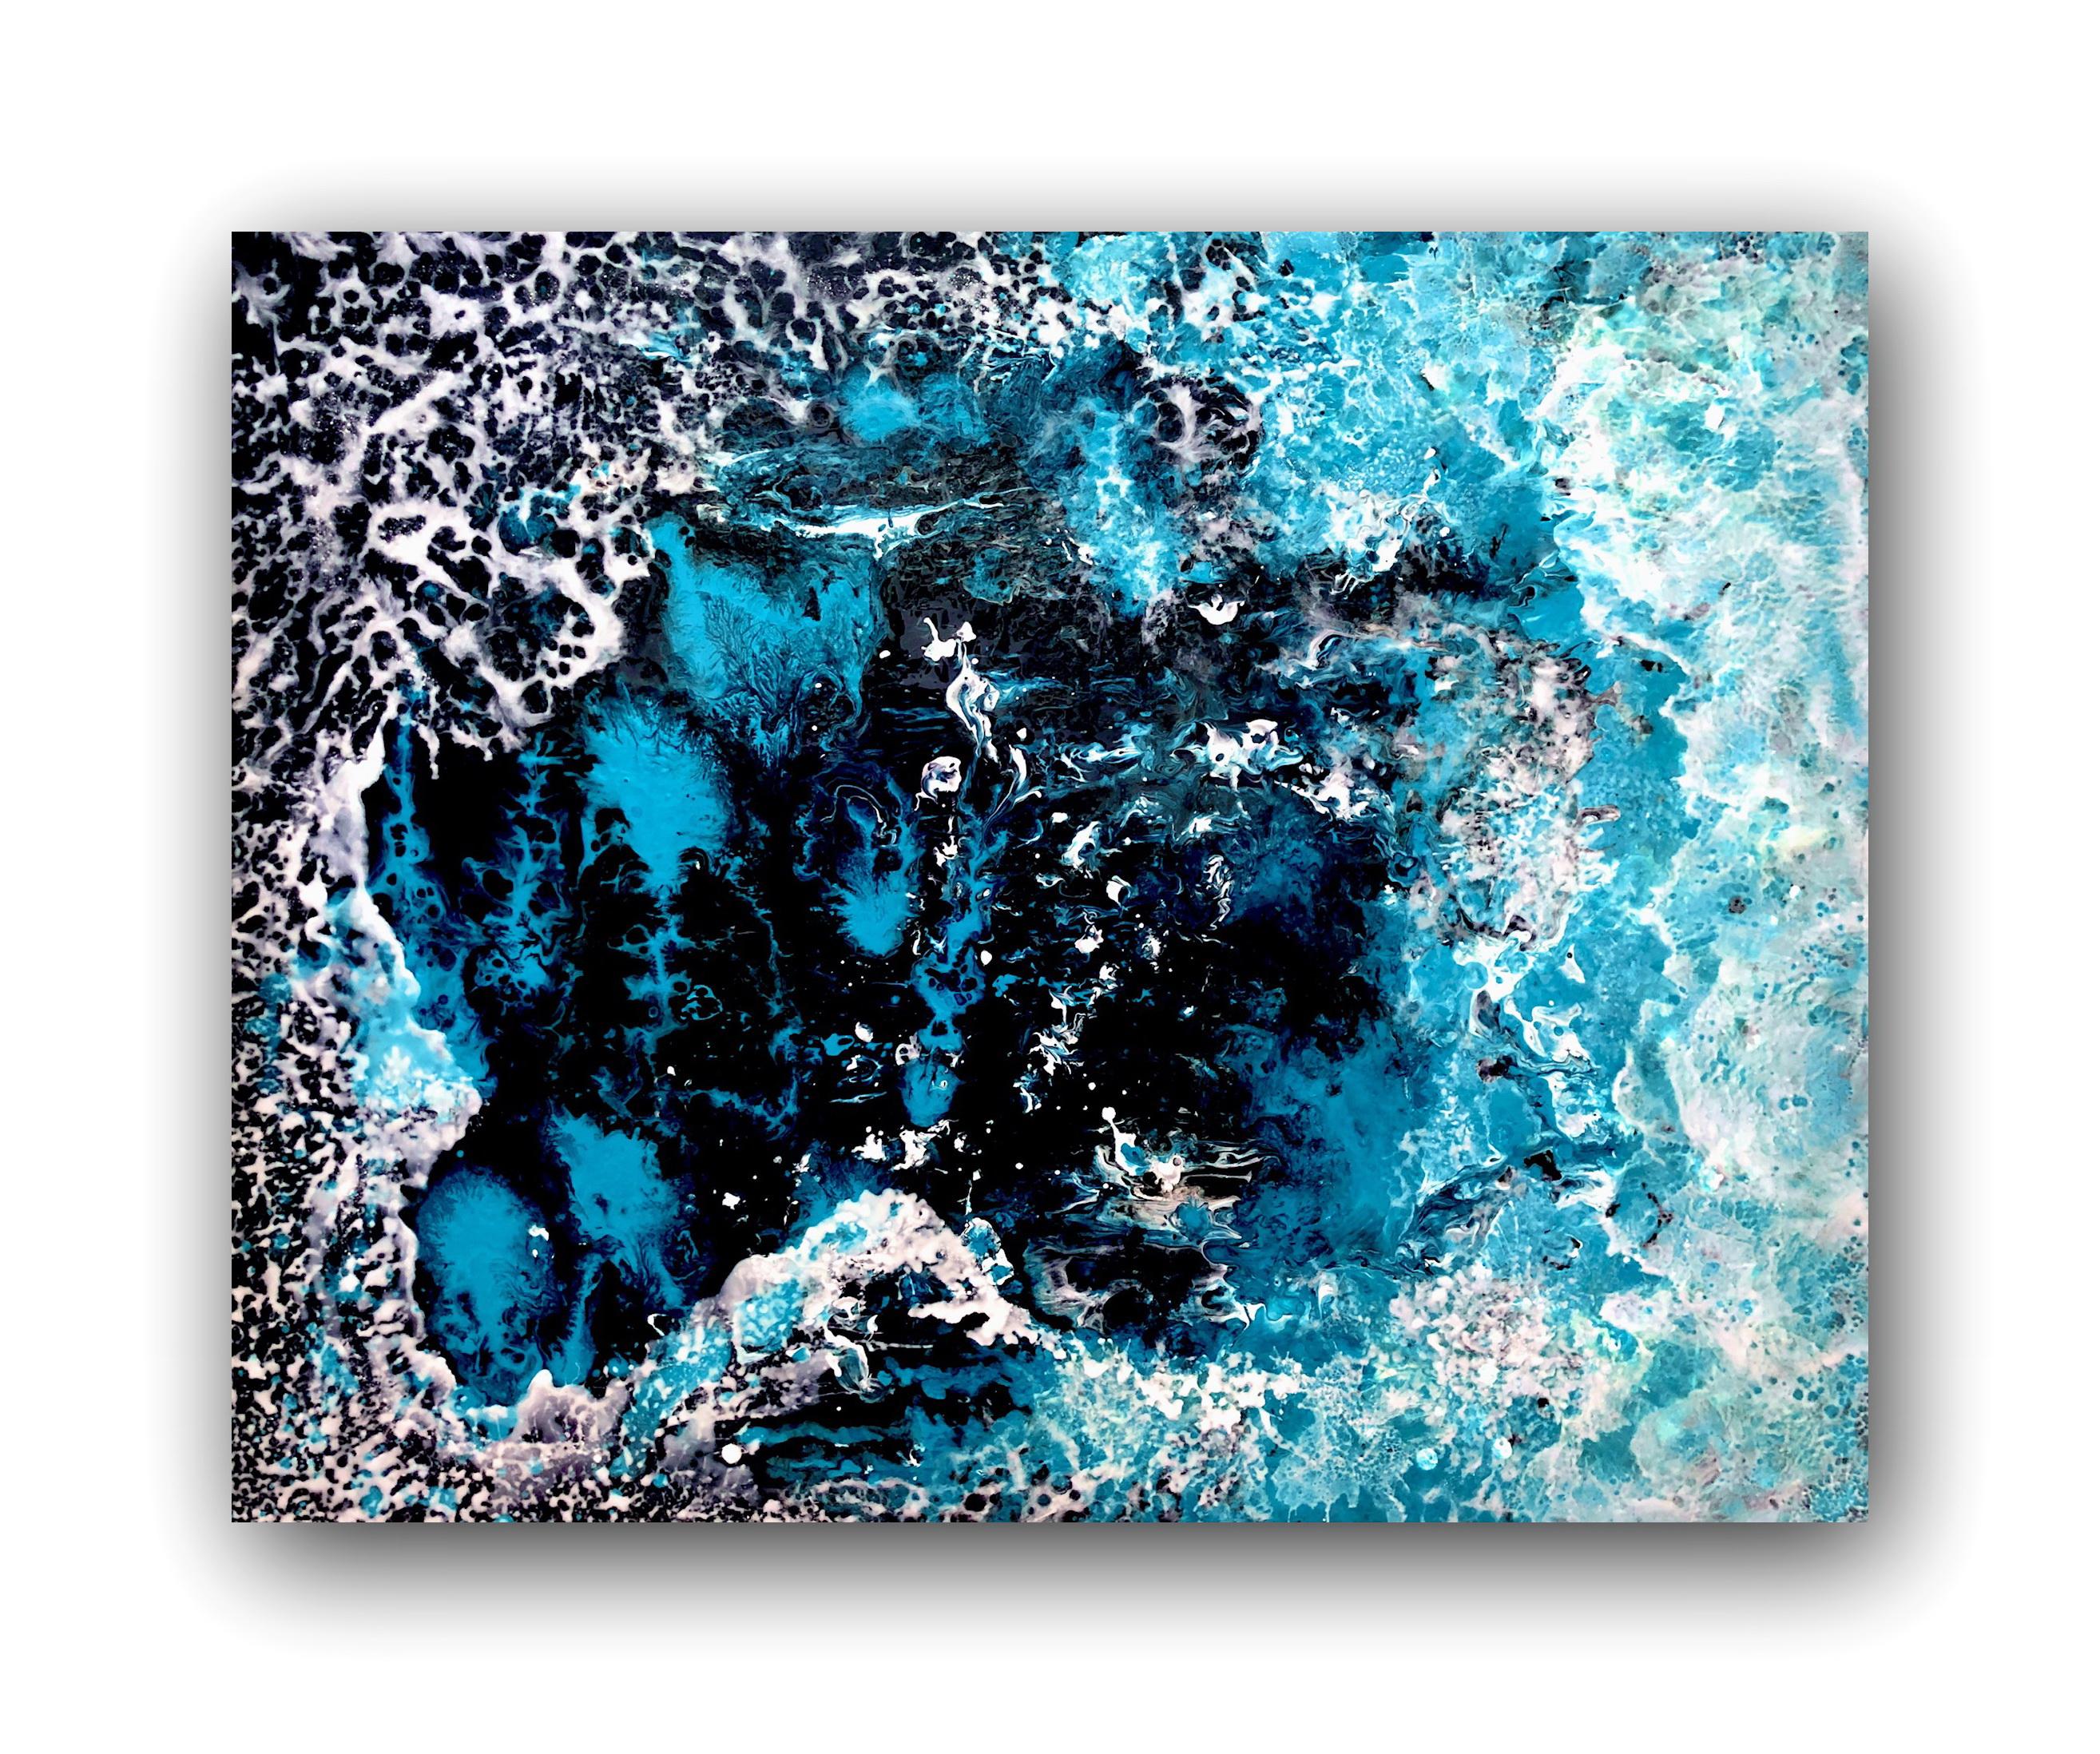 Looking into the Depth. Abstract Lage painting. / Water/ Sea / Blue, white color For Sale 3